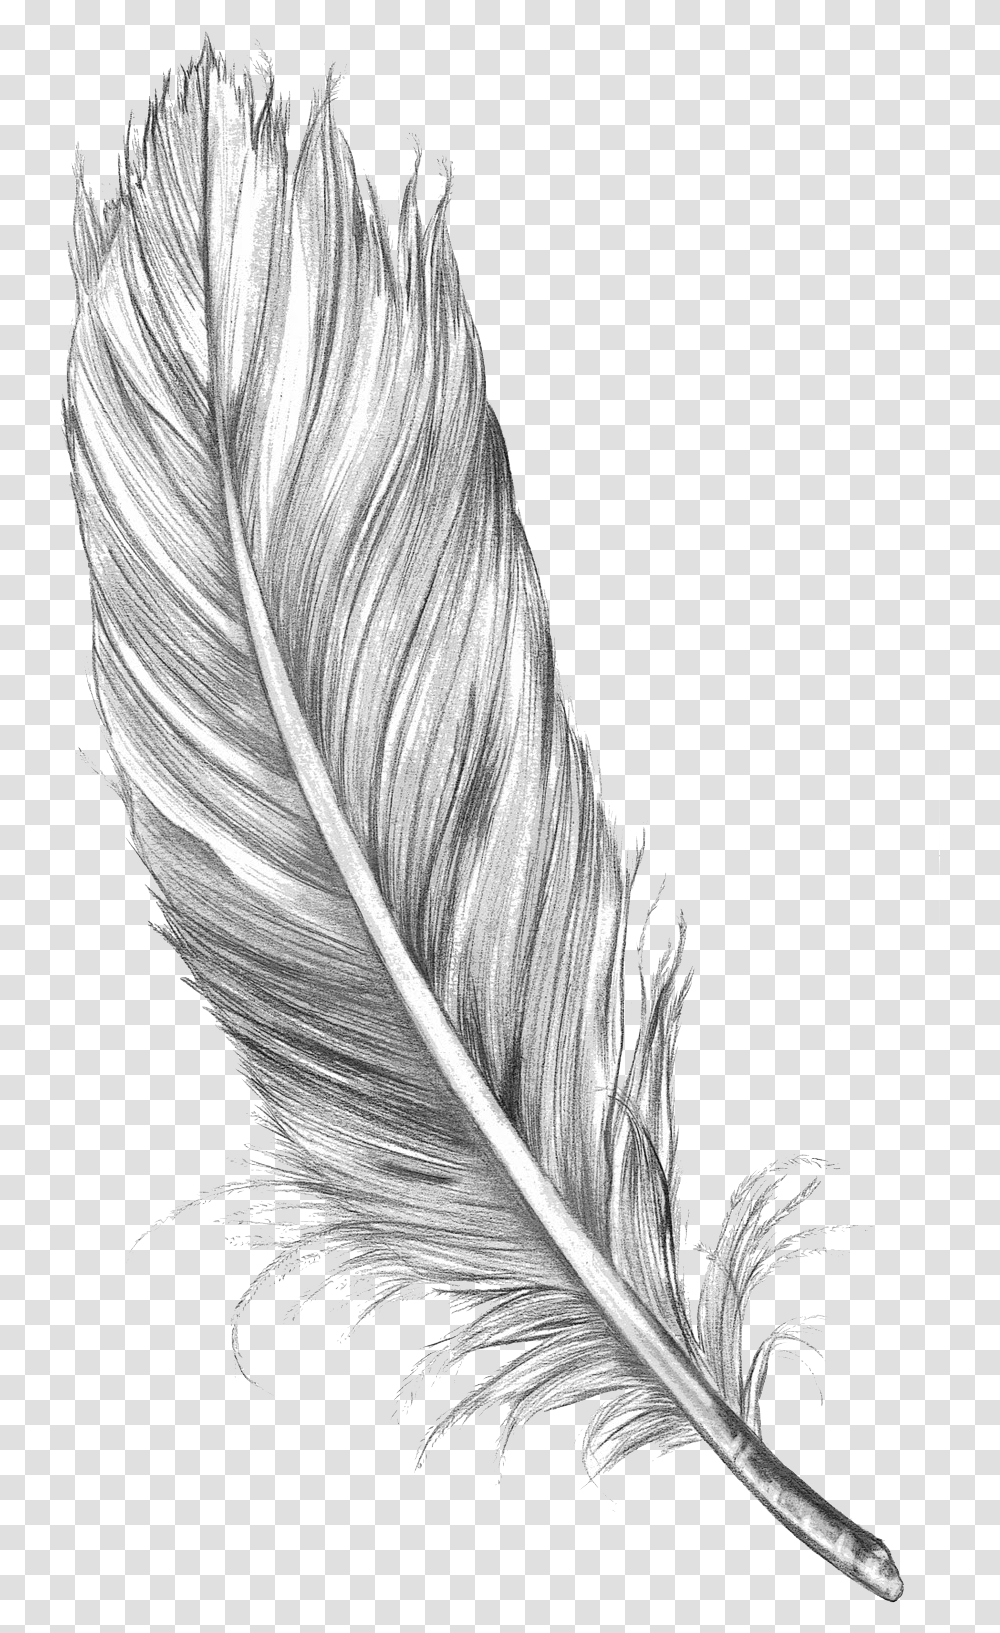 Feather Art Drawing Sketch Bird Free Hd Image Clipart Feather Sketch, Animal, Bottle, Ink Bottle Transparent Png